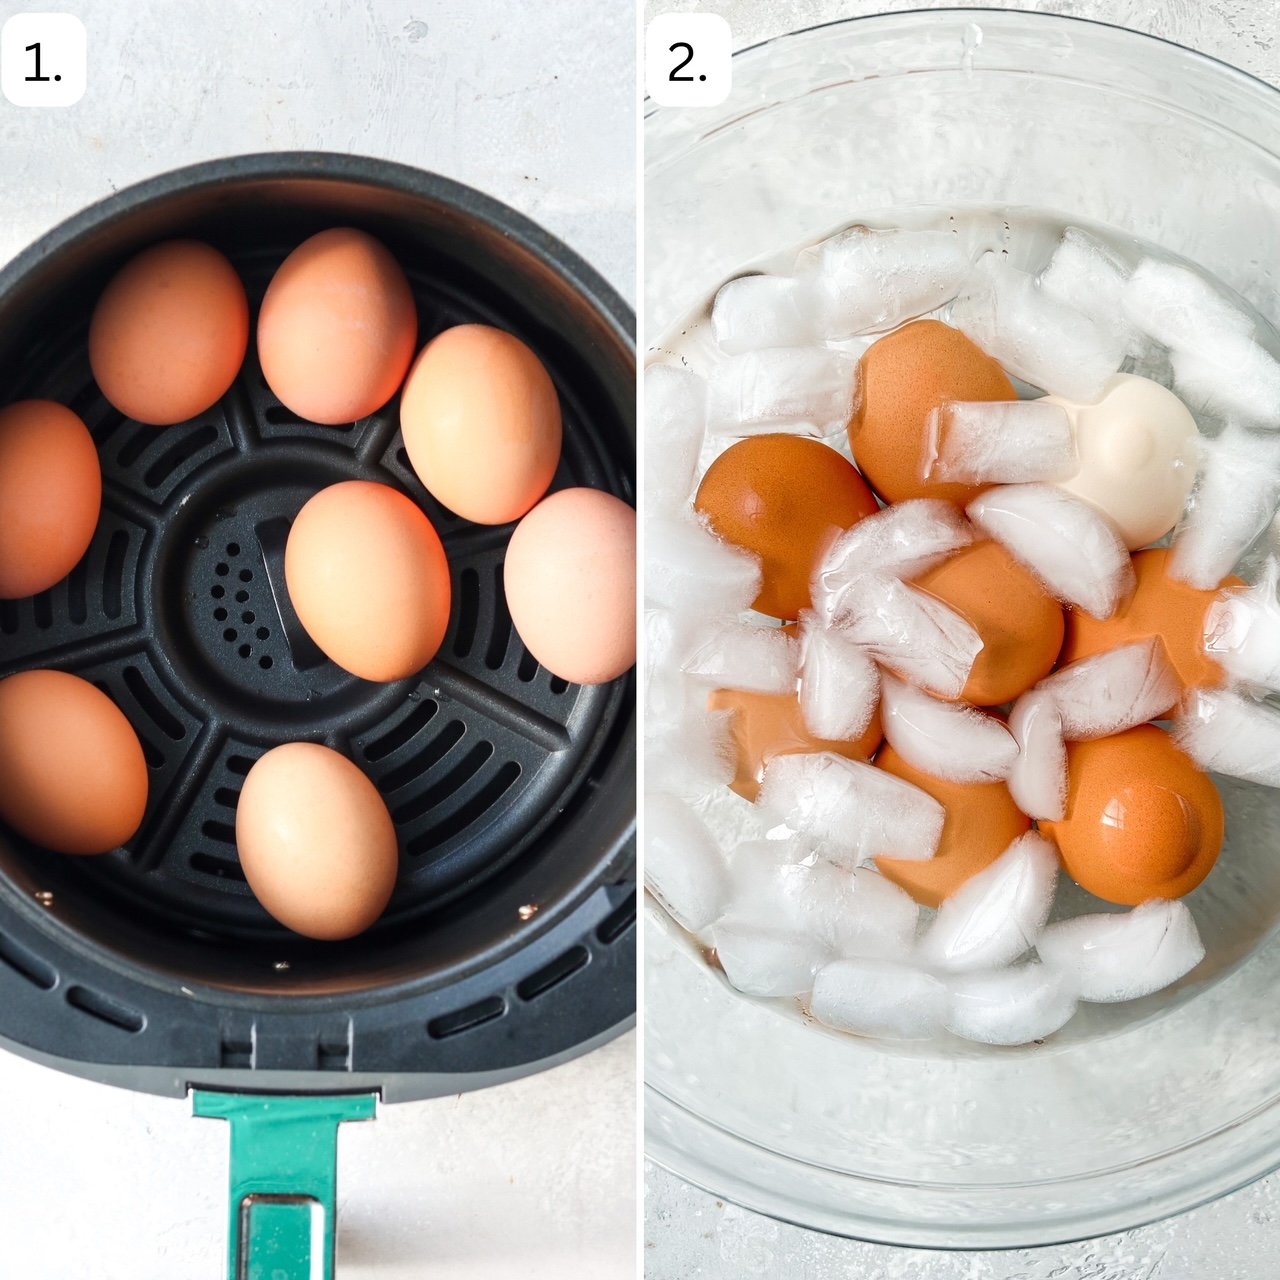 numbered step by step photos showing how to make air fryer eggs and then put them into an ice bath.